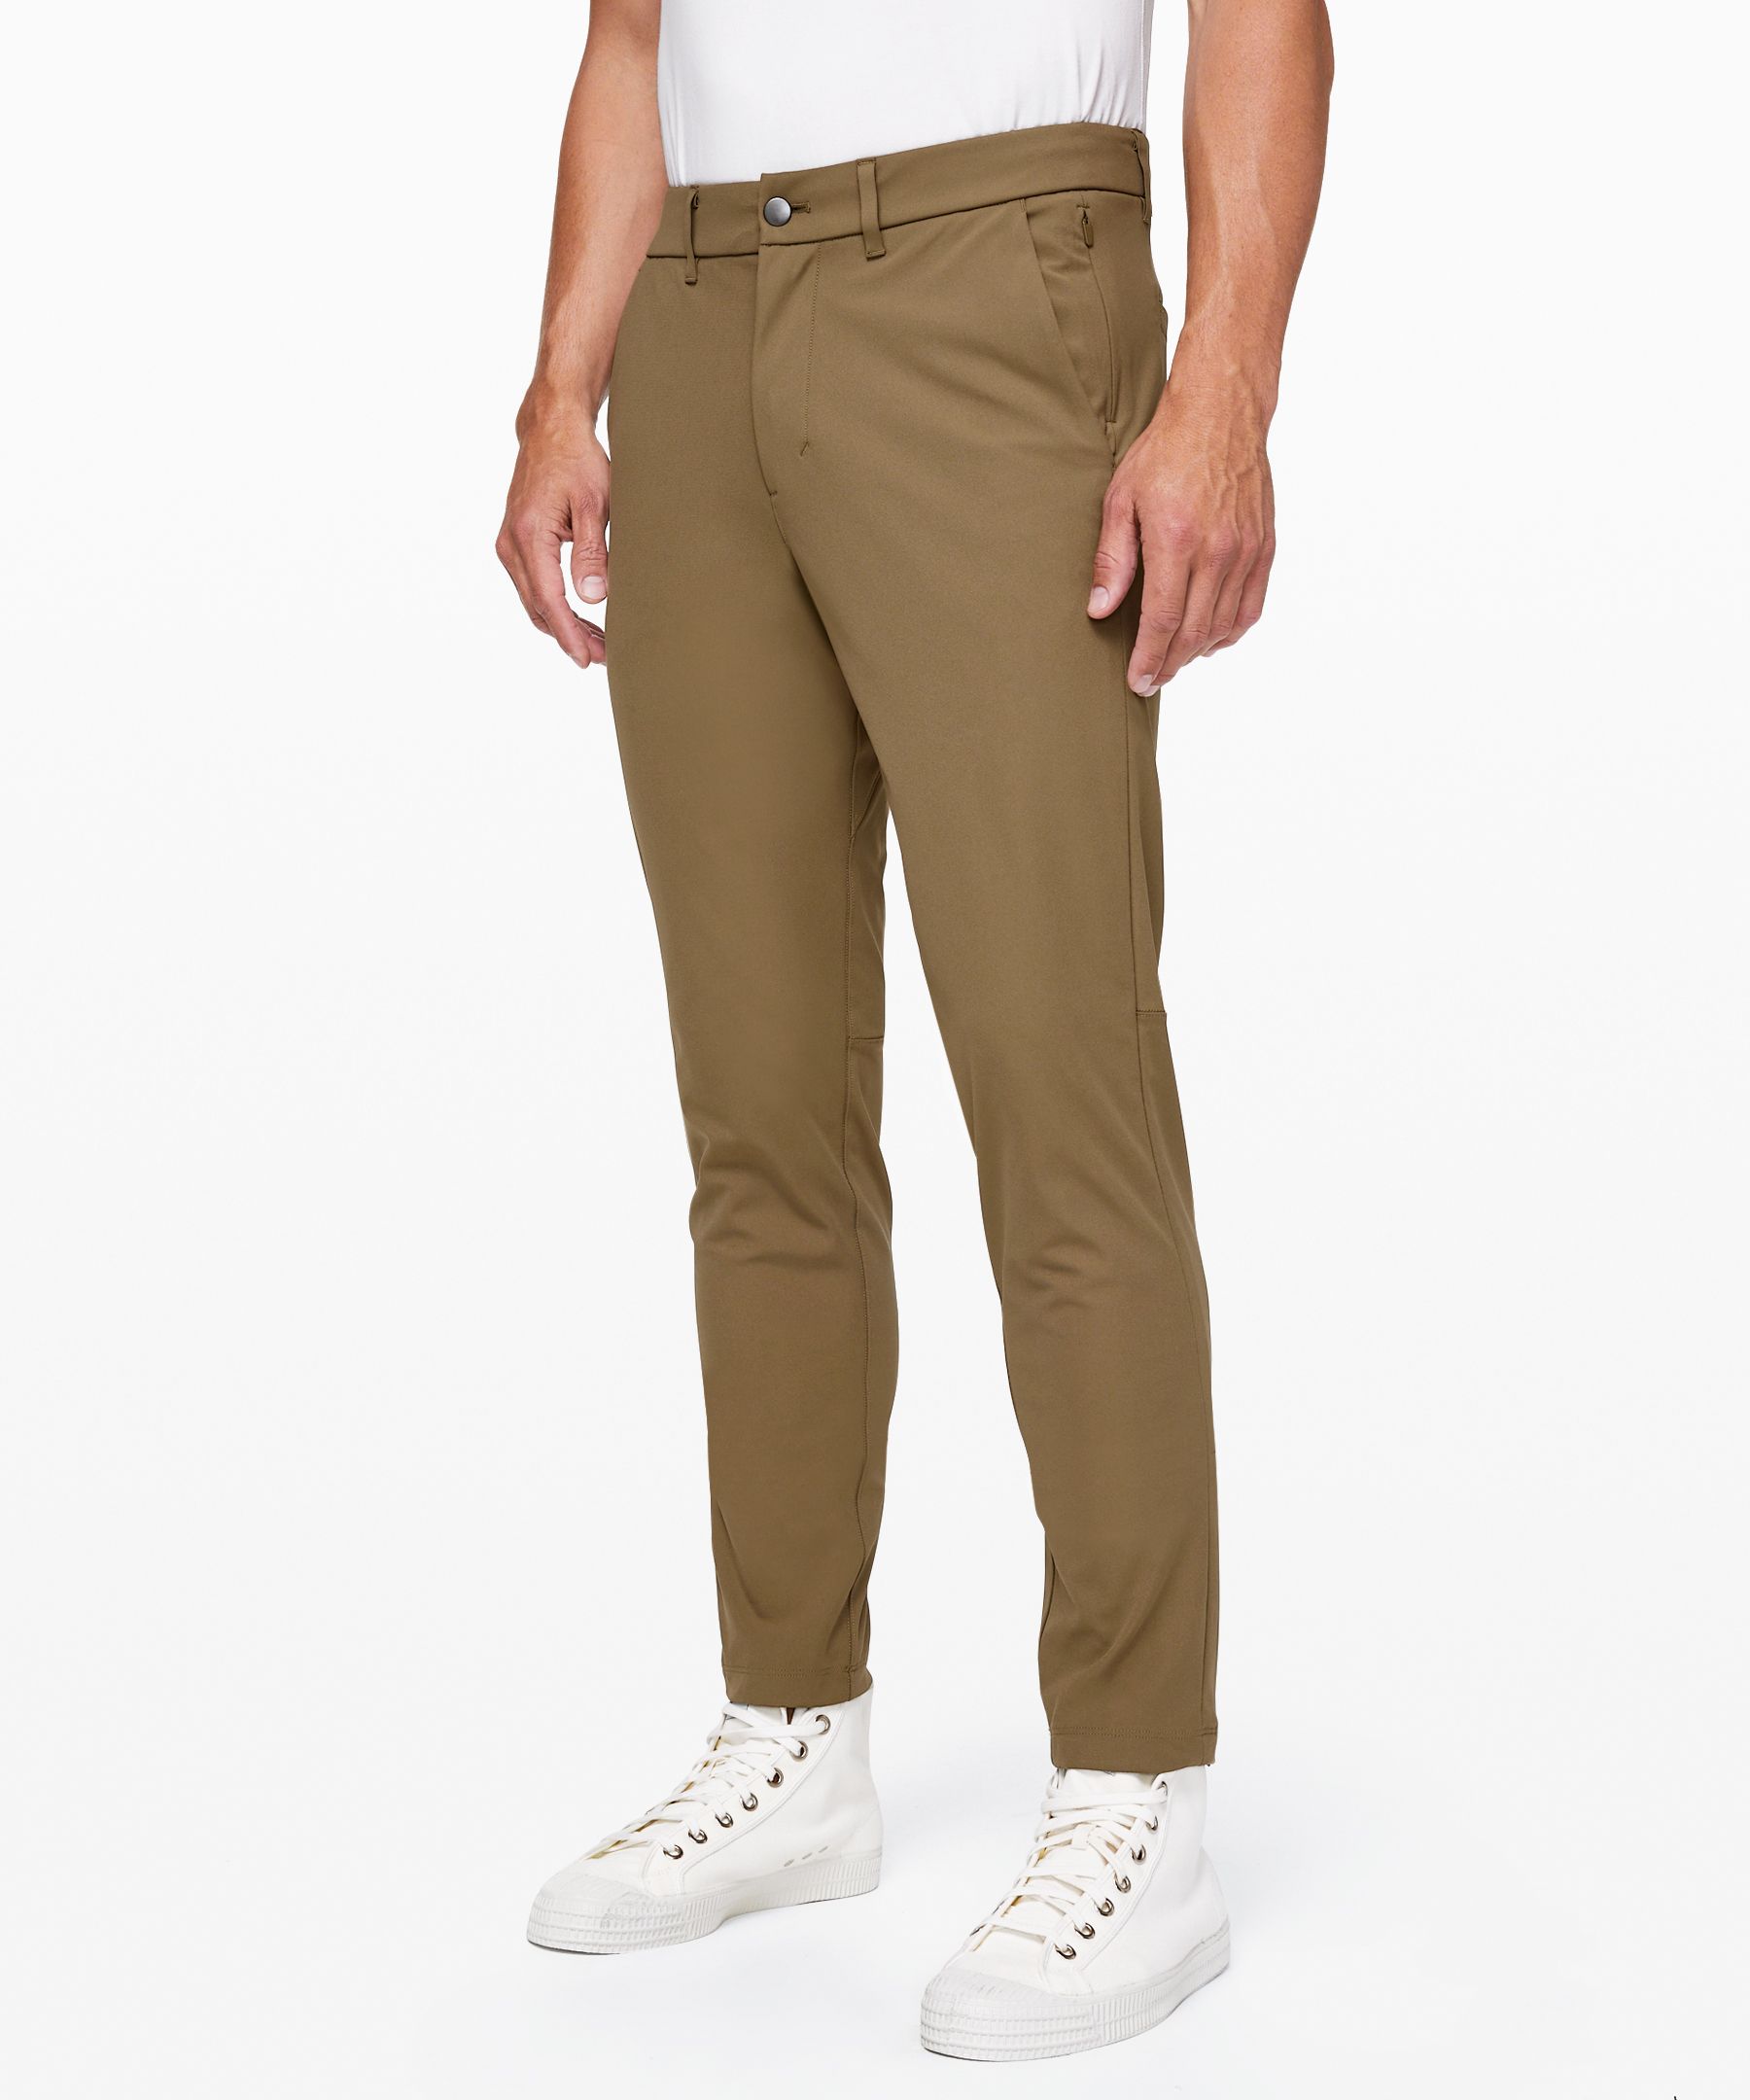 Lululemon Commuter Pants  International Society of Precision Agriculture